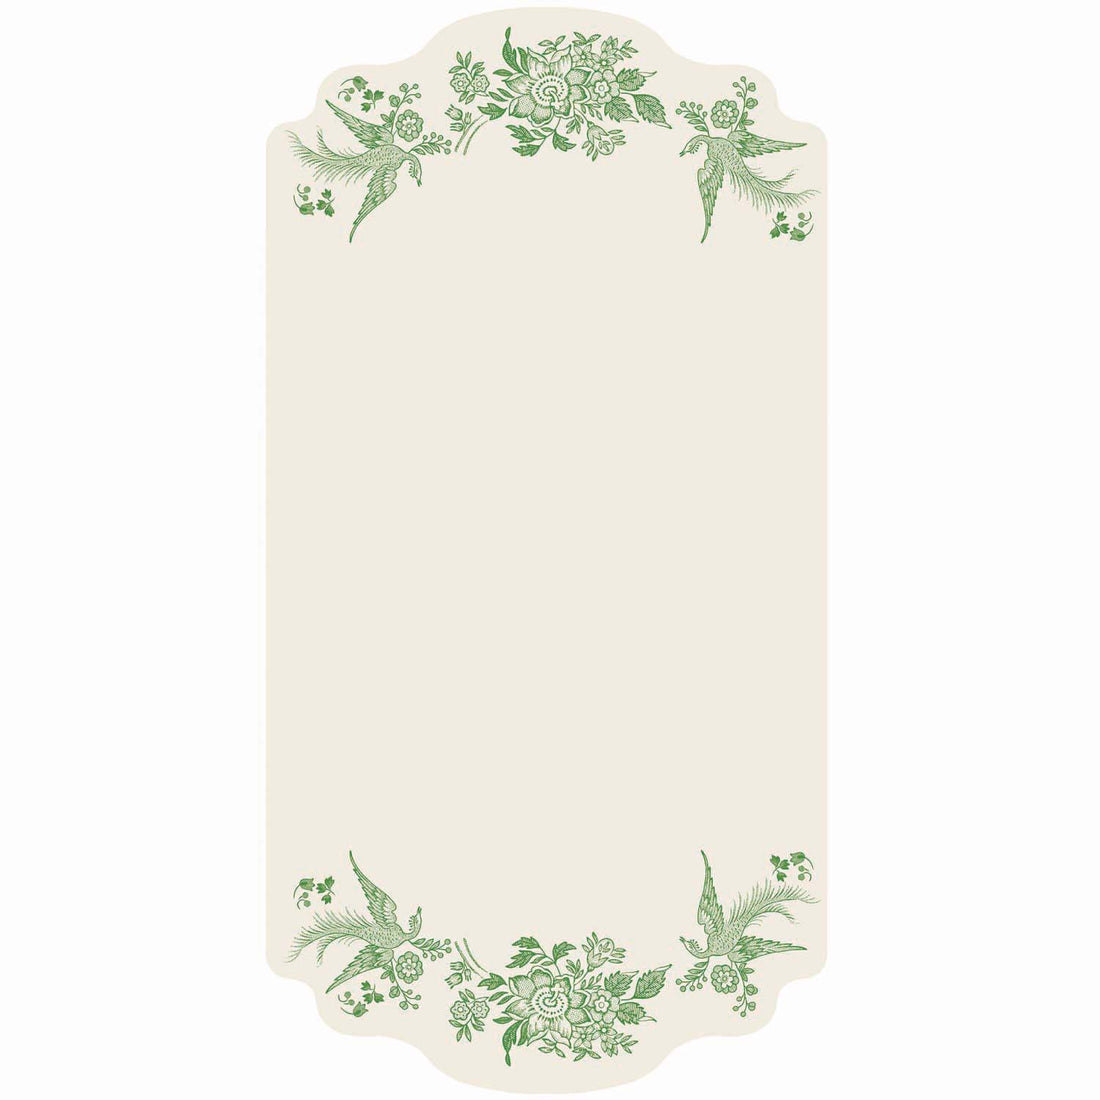 A white rectangular die-cut card featuring a green vintage Burleigh-style floral and bird design along the top and bottom edges.